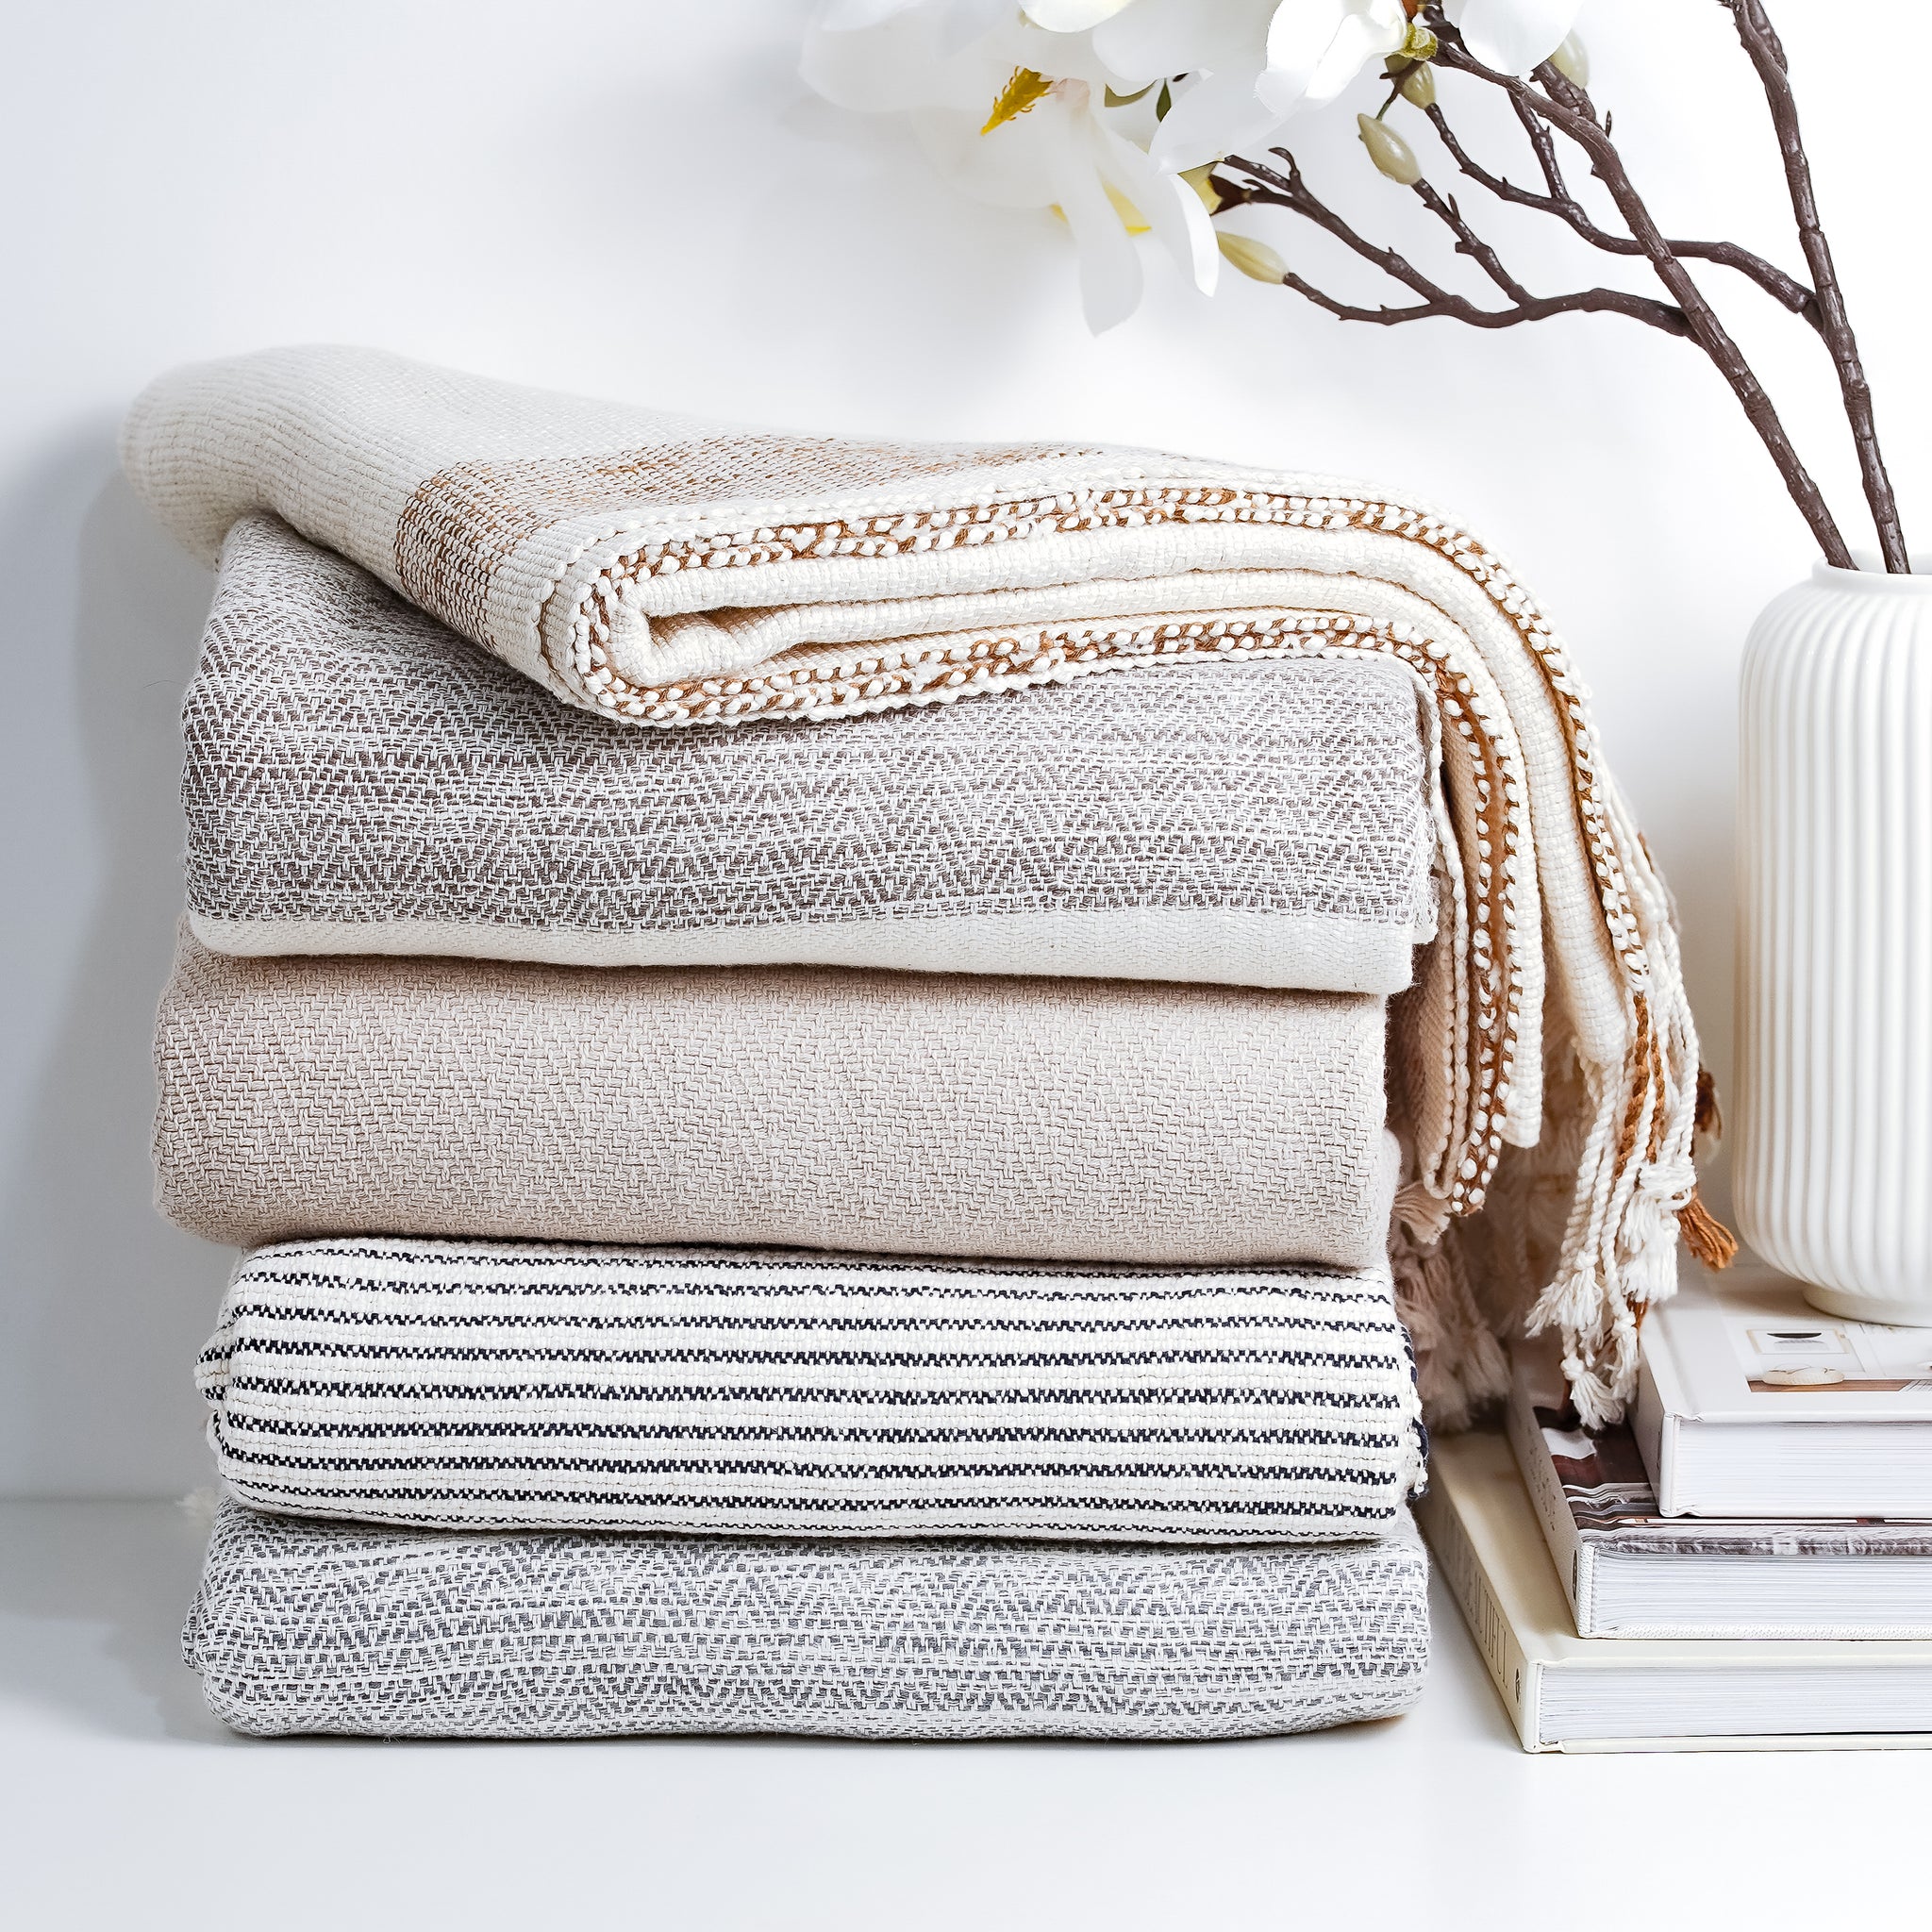 Bring comfort and style to your home with this modern and minimalist throw blanket.   This throw is large, but lightweight and perfect to cozy up with or drape over any sofa back, armchair, or foot of the bed all year long. 